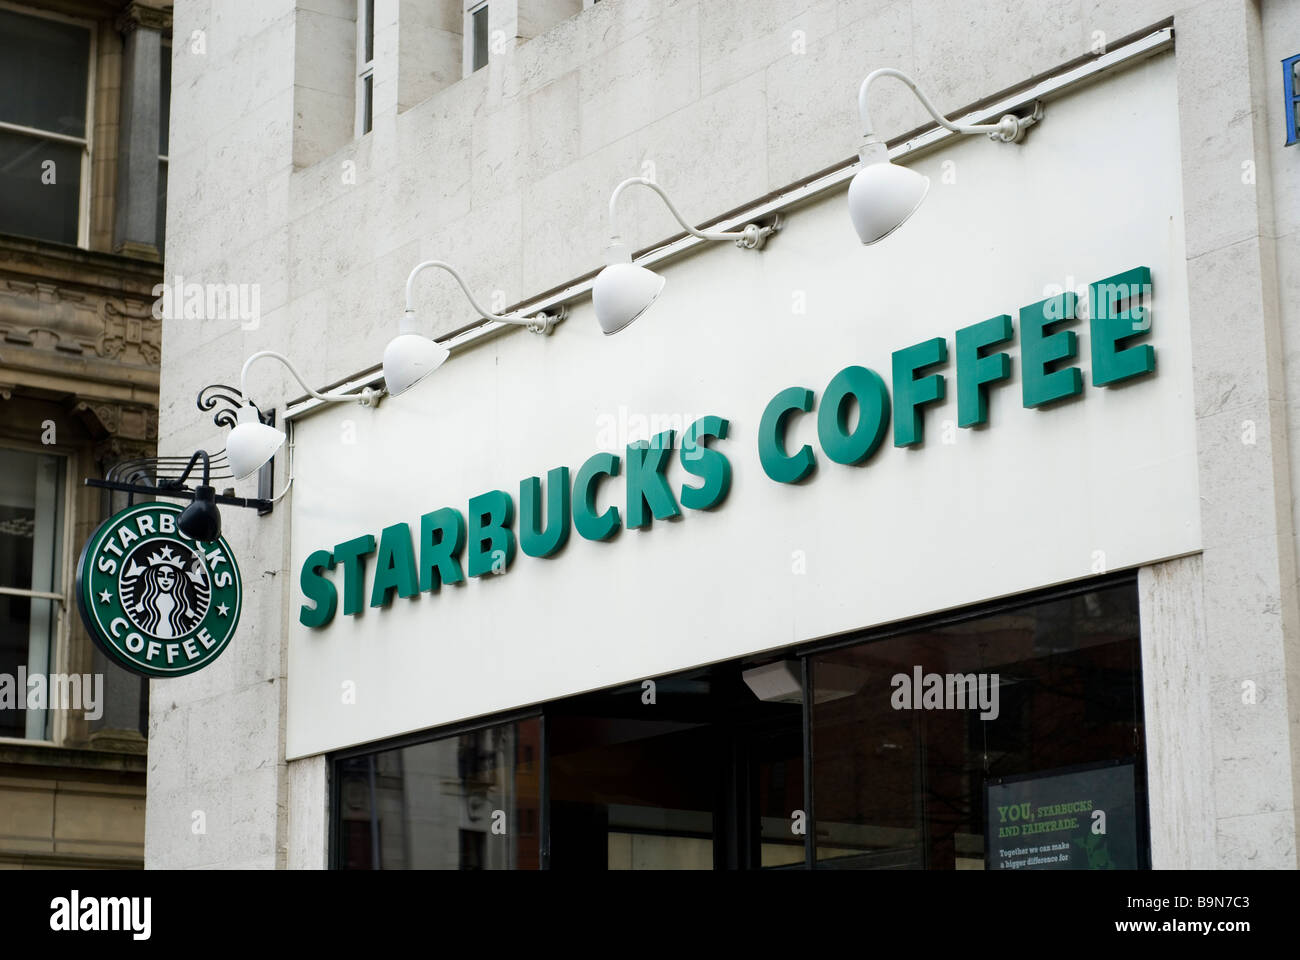 Starbucks coffee shop sign in Manchester city centre UK Stock Photo